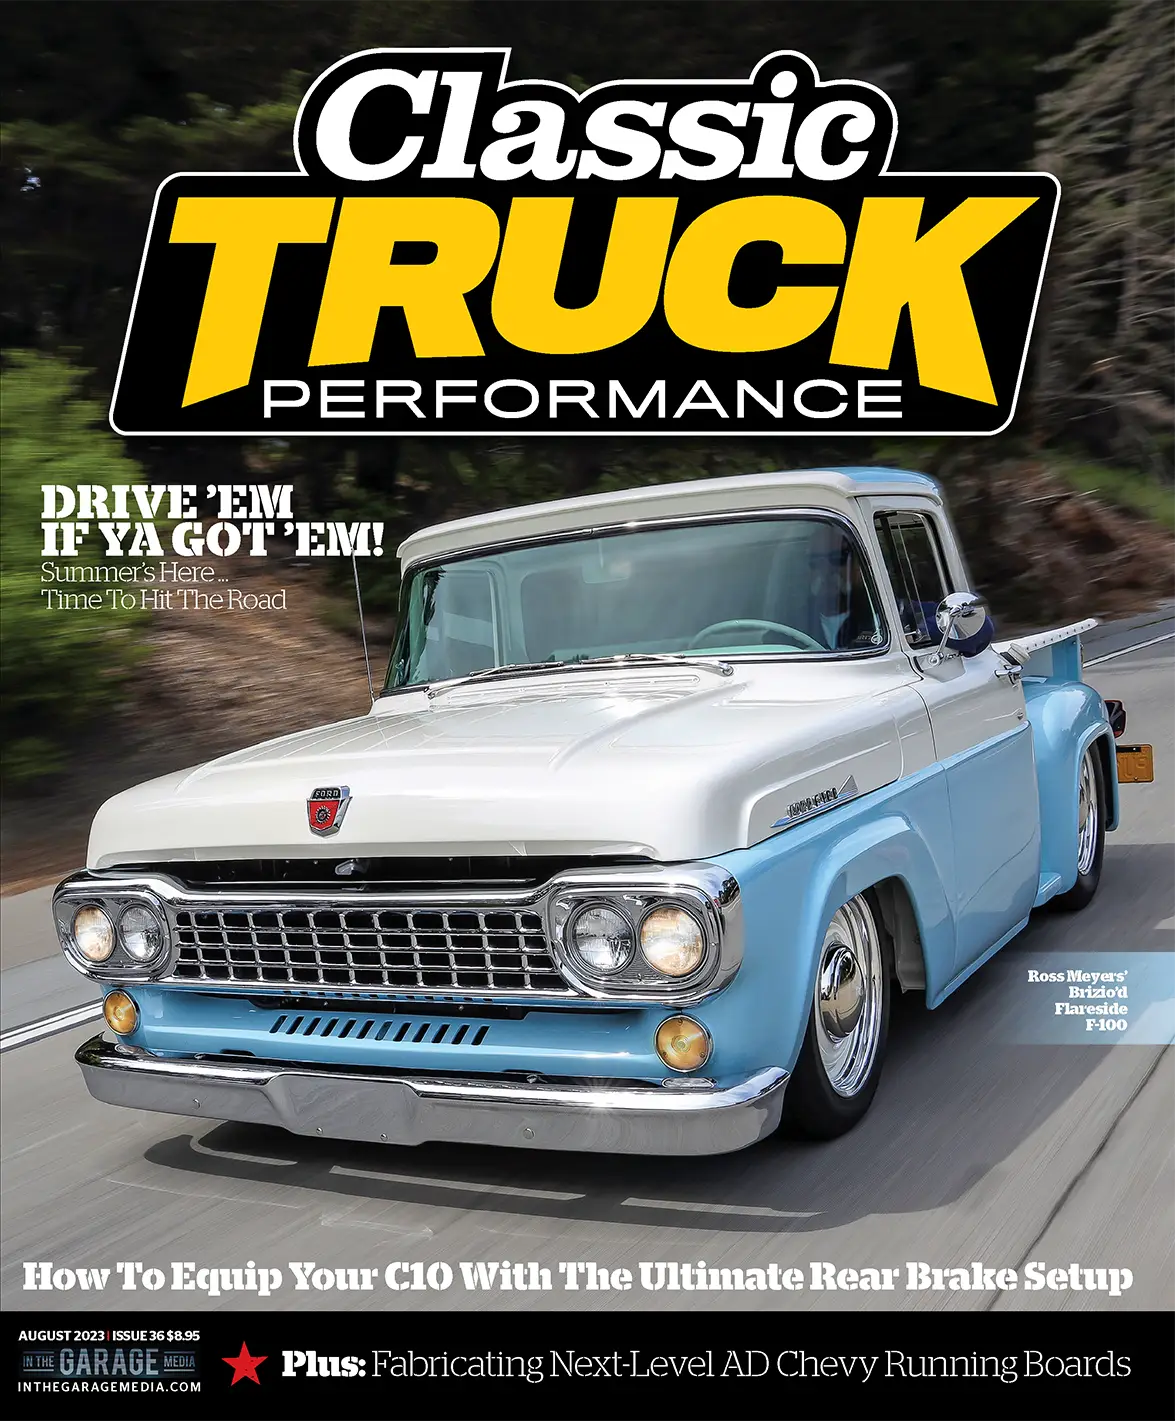 Classic Truck Performance July 2023 cover